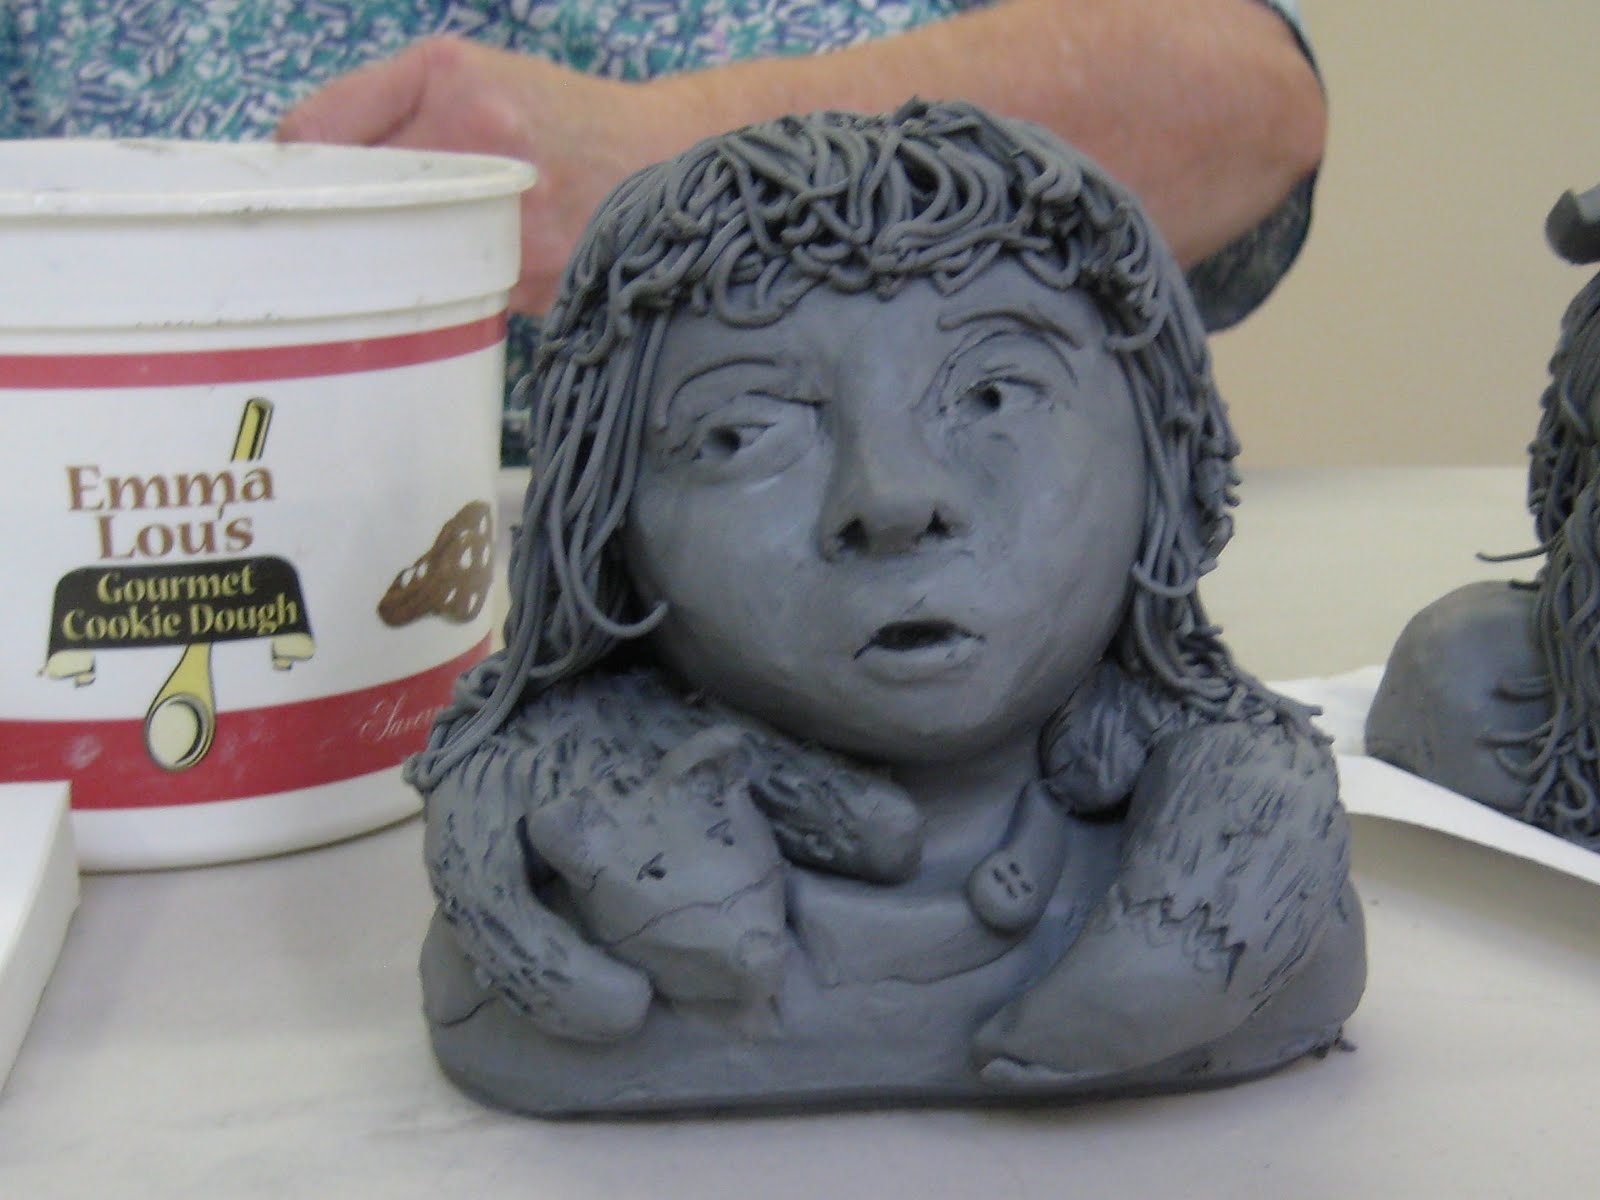 Carving Clay - Non-Objective Sculpture